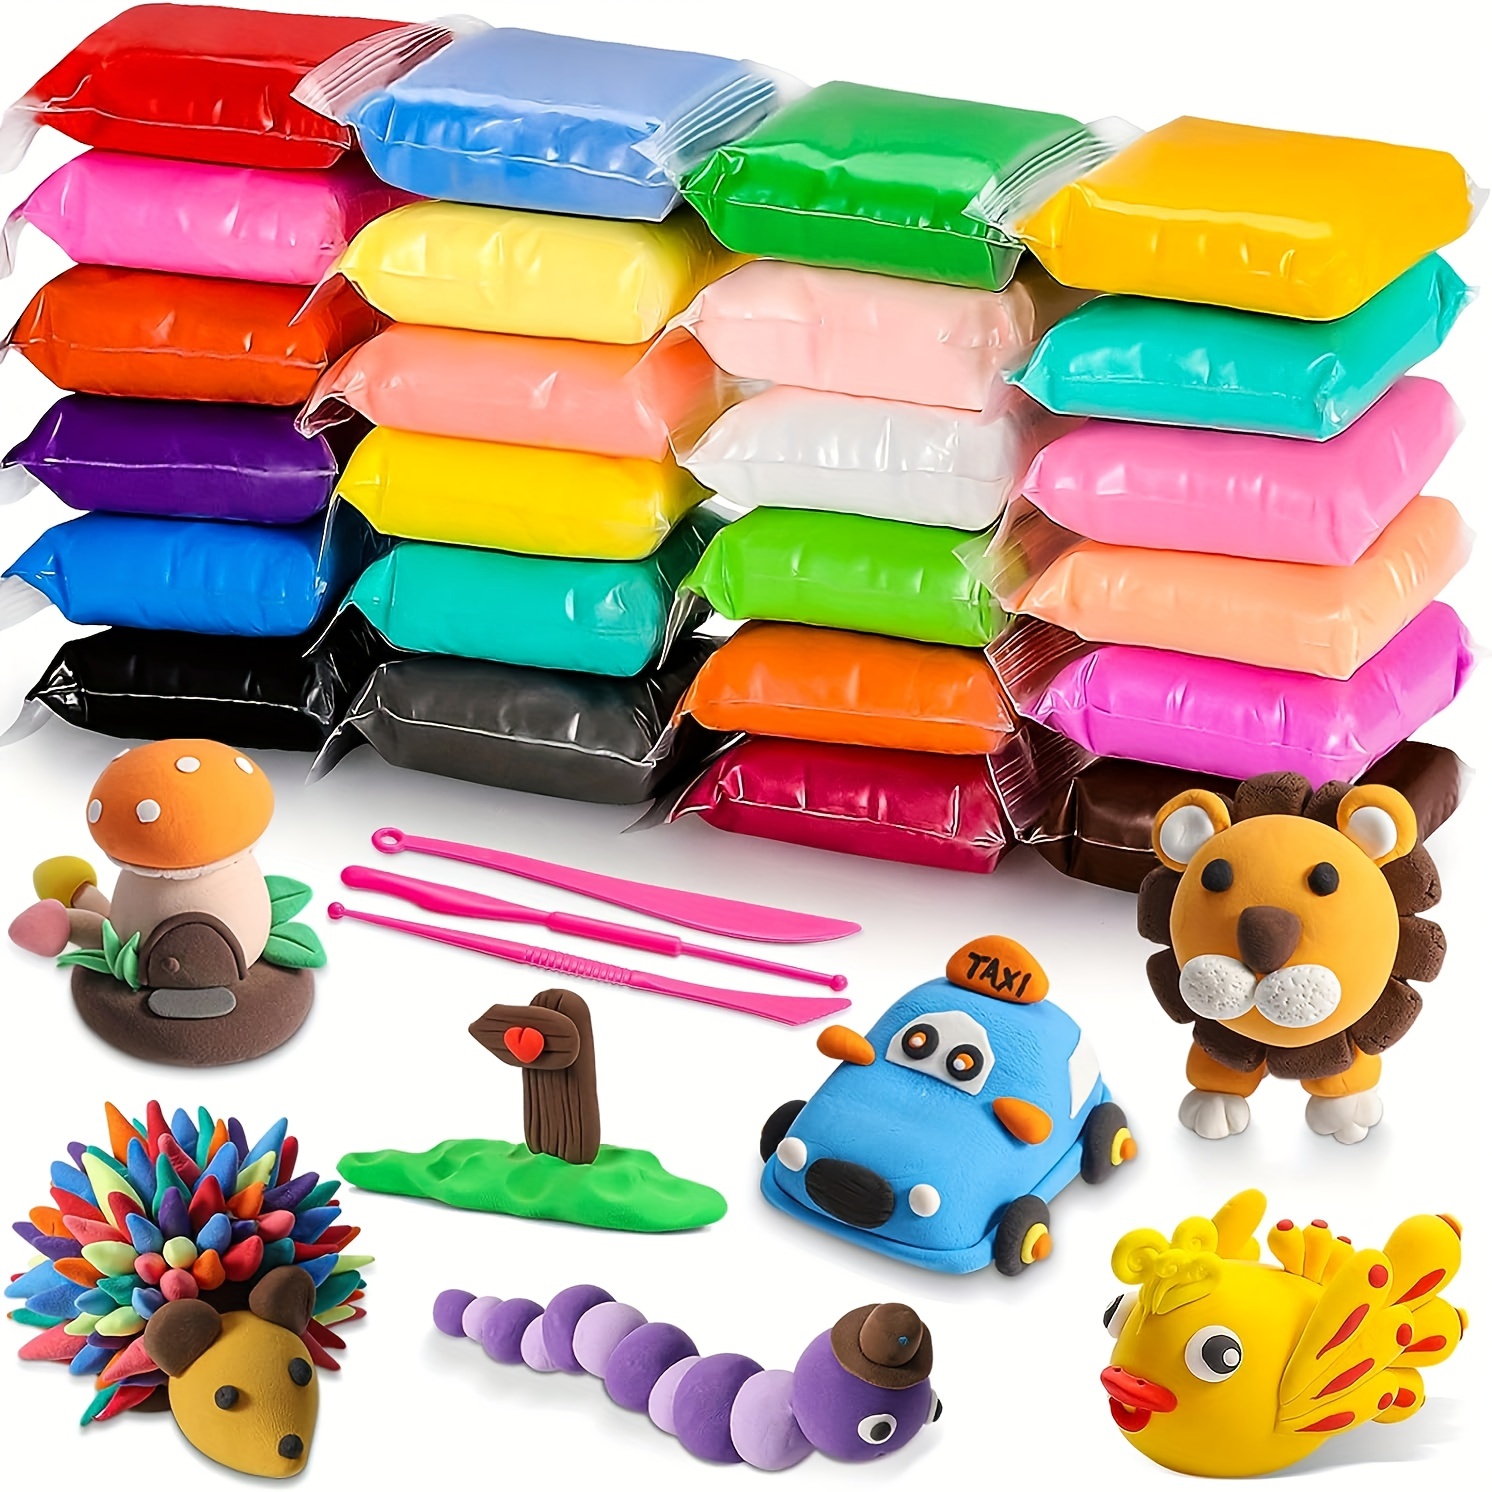 Modelling Clay Kit - 24 Colors Air Dry Ultra Light Magic Clay, Soft & Stretchable DIY Molding Clay with Tools, Animal Accessories, Easy Storage B